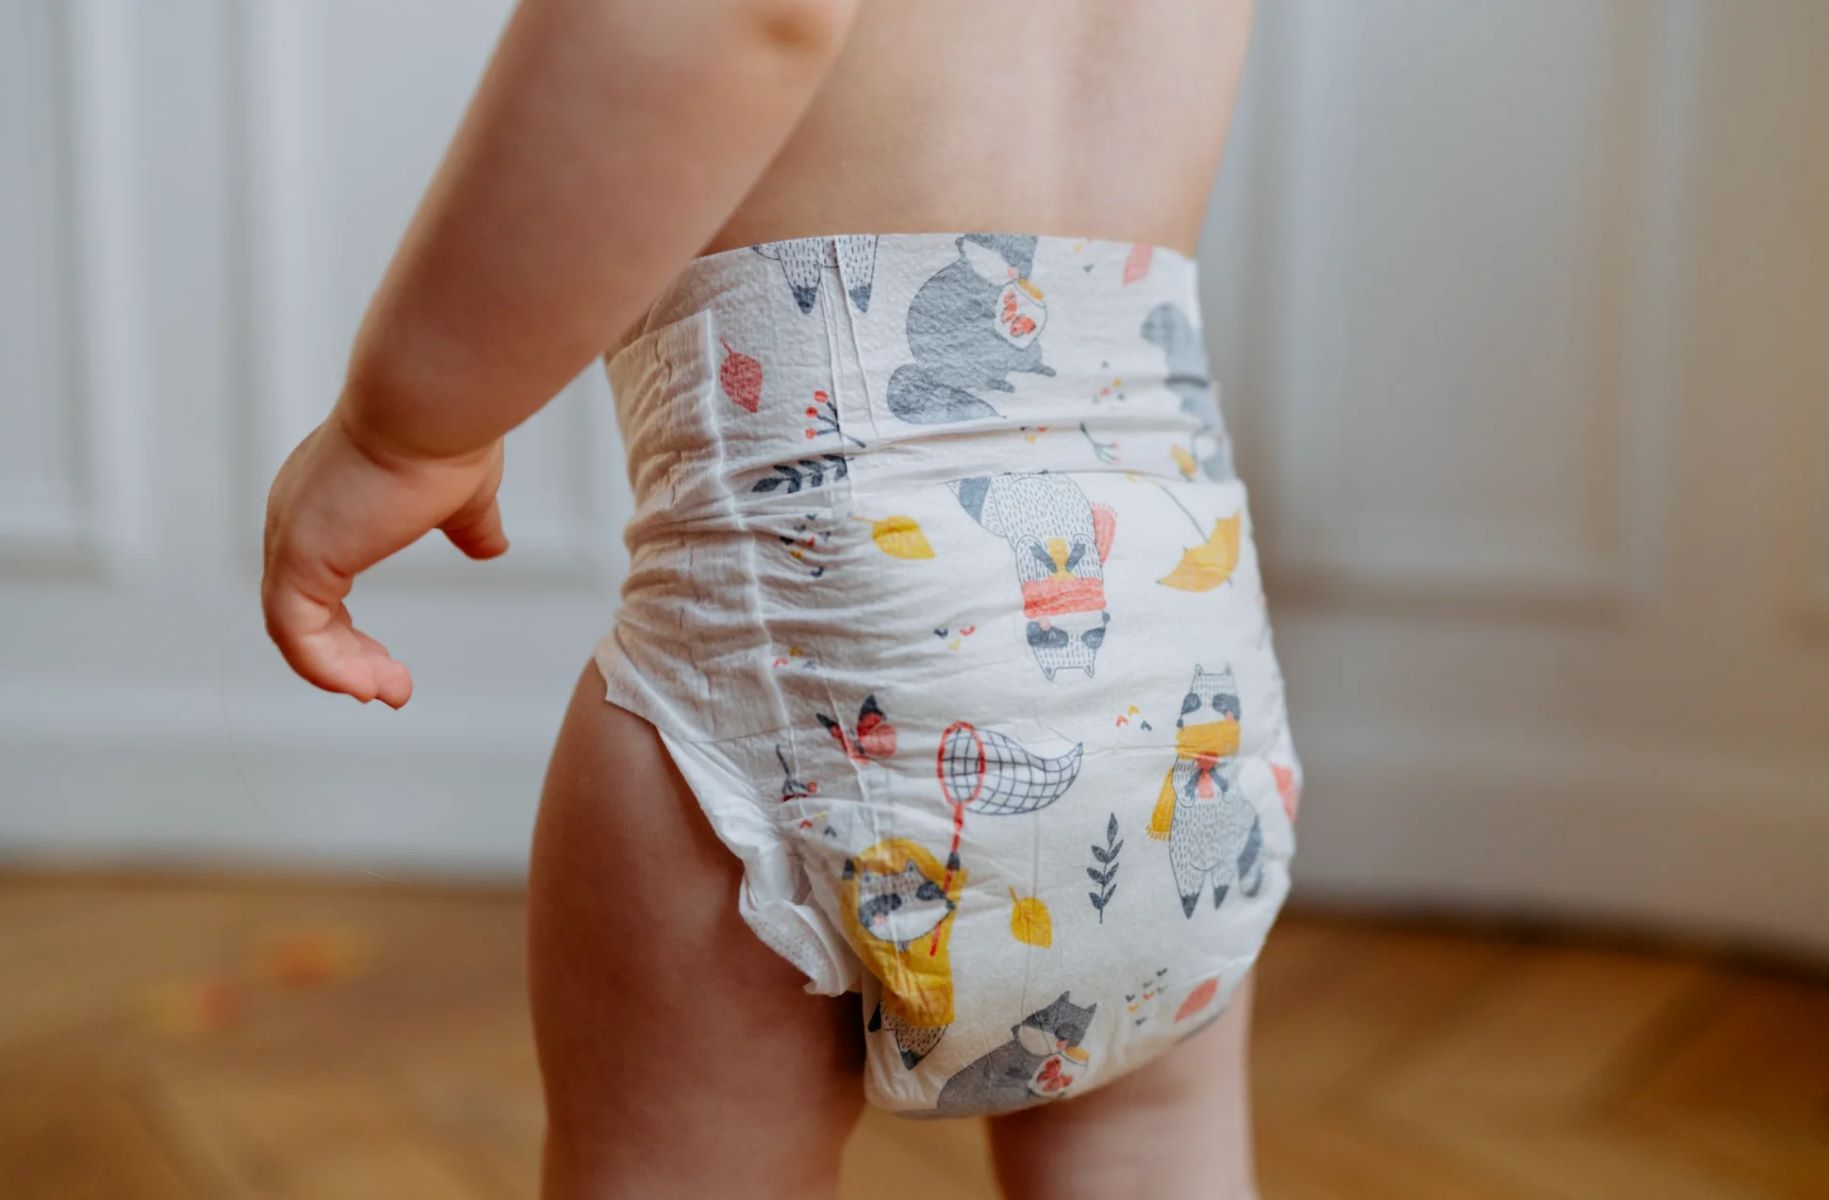 10 Hilariously Embarrassing Diaper Mishaps That Happened At School